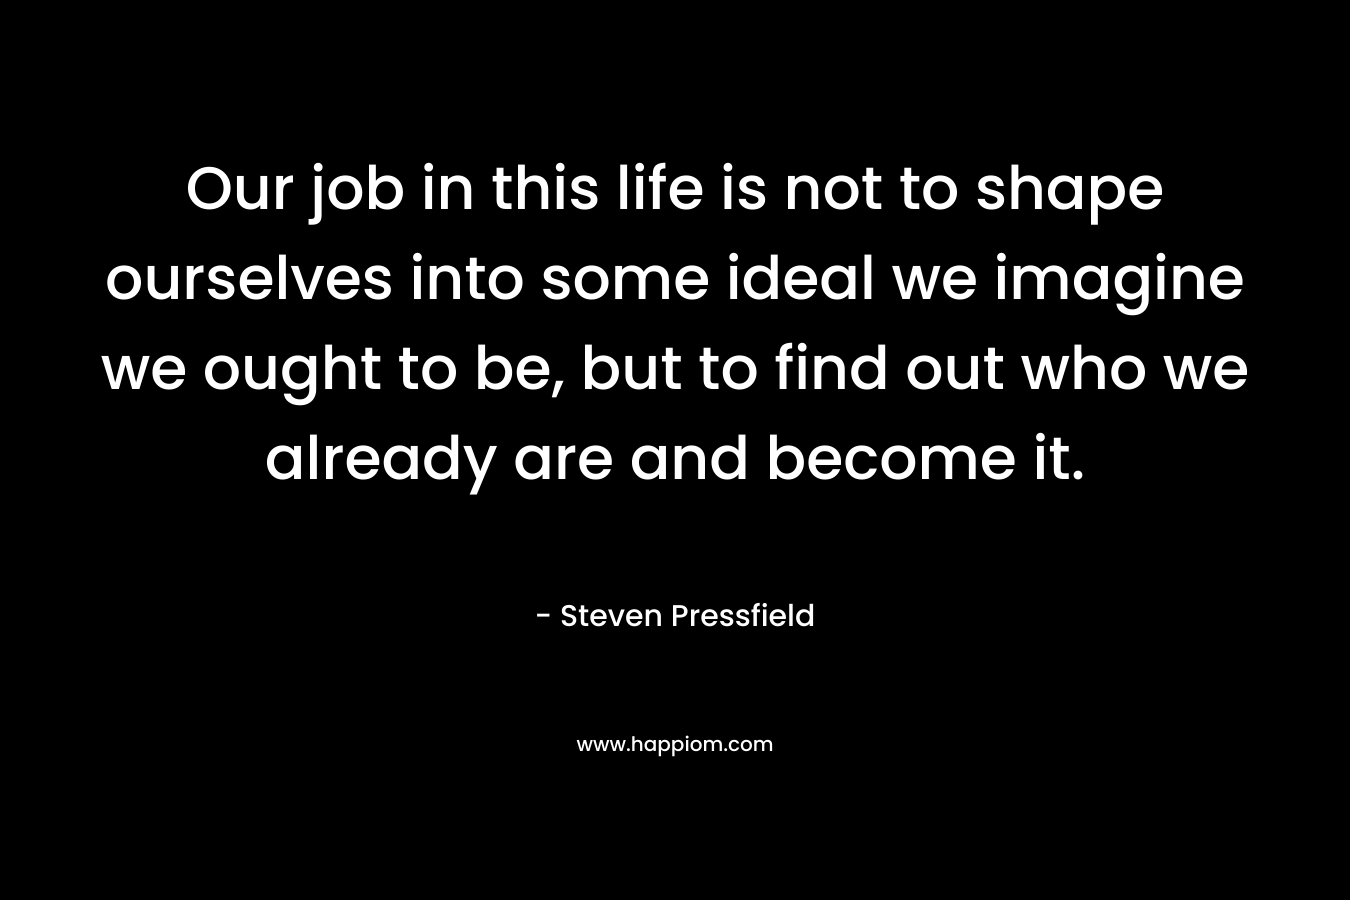 Our job in this life is not to shape ourselves into some ideal we imagine we ought to be, but to find out who we already are and become it.